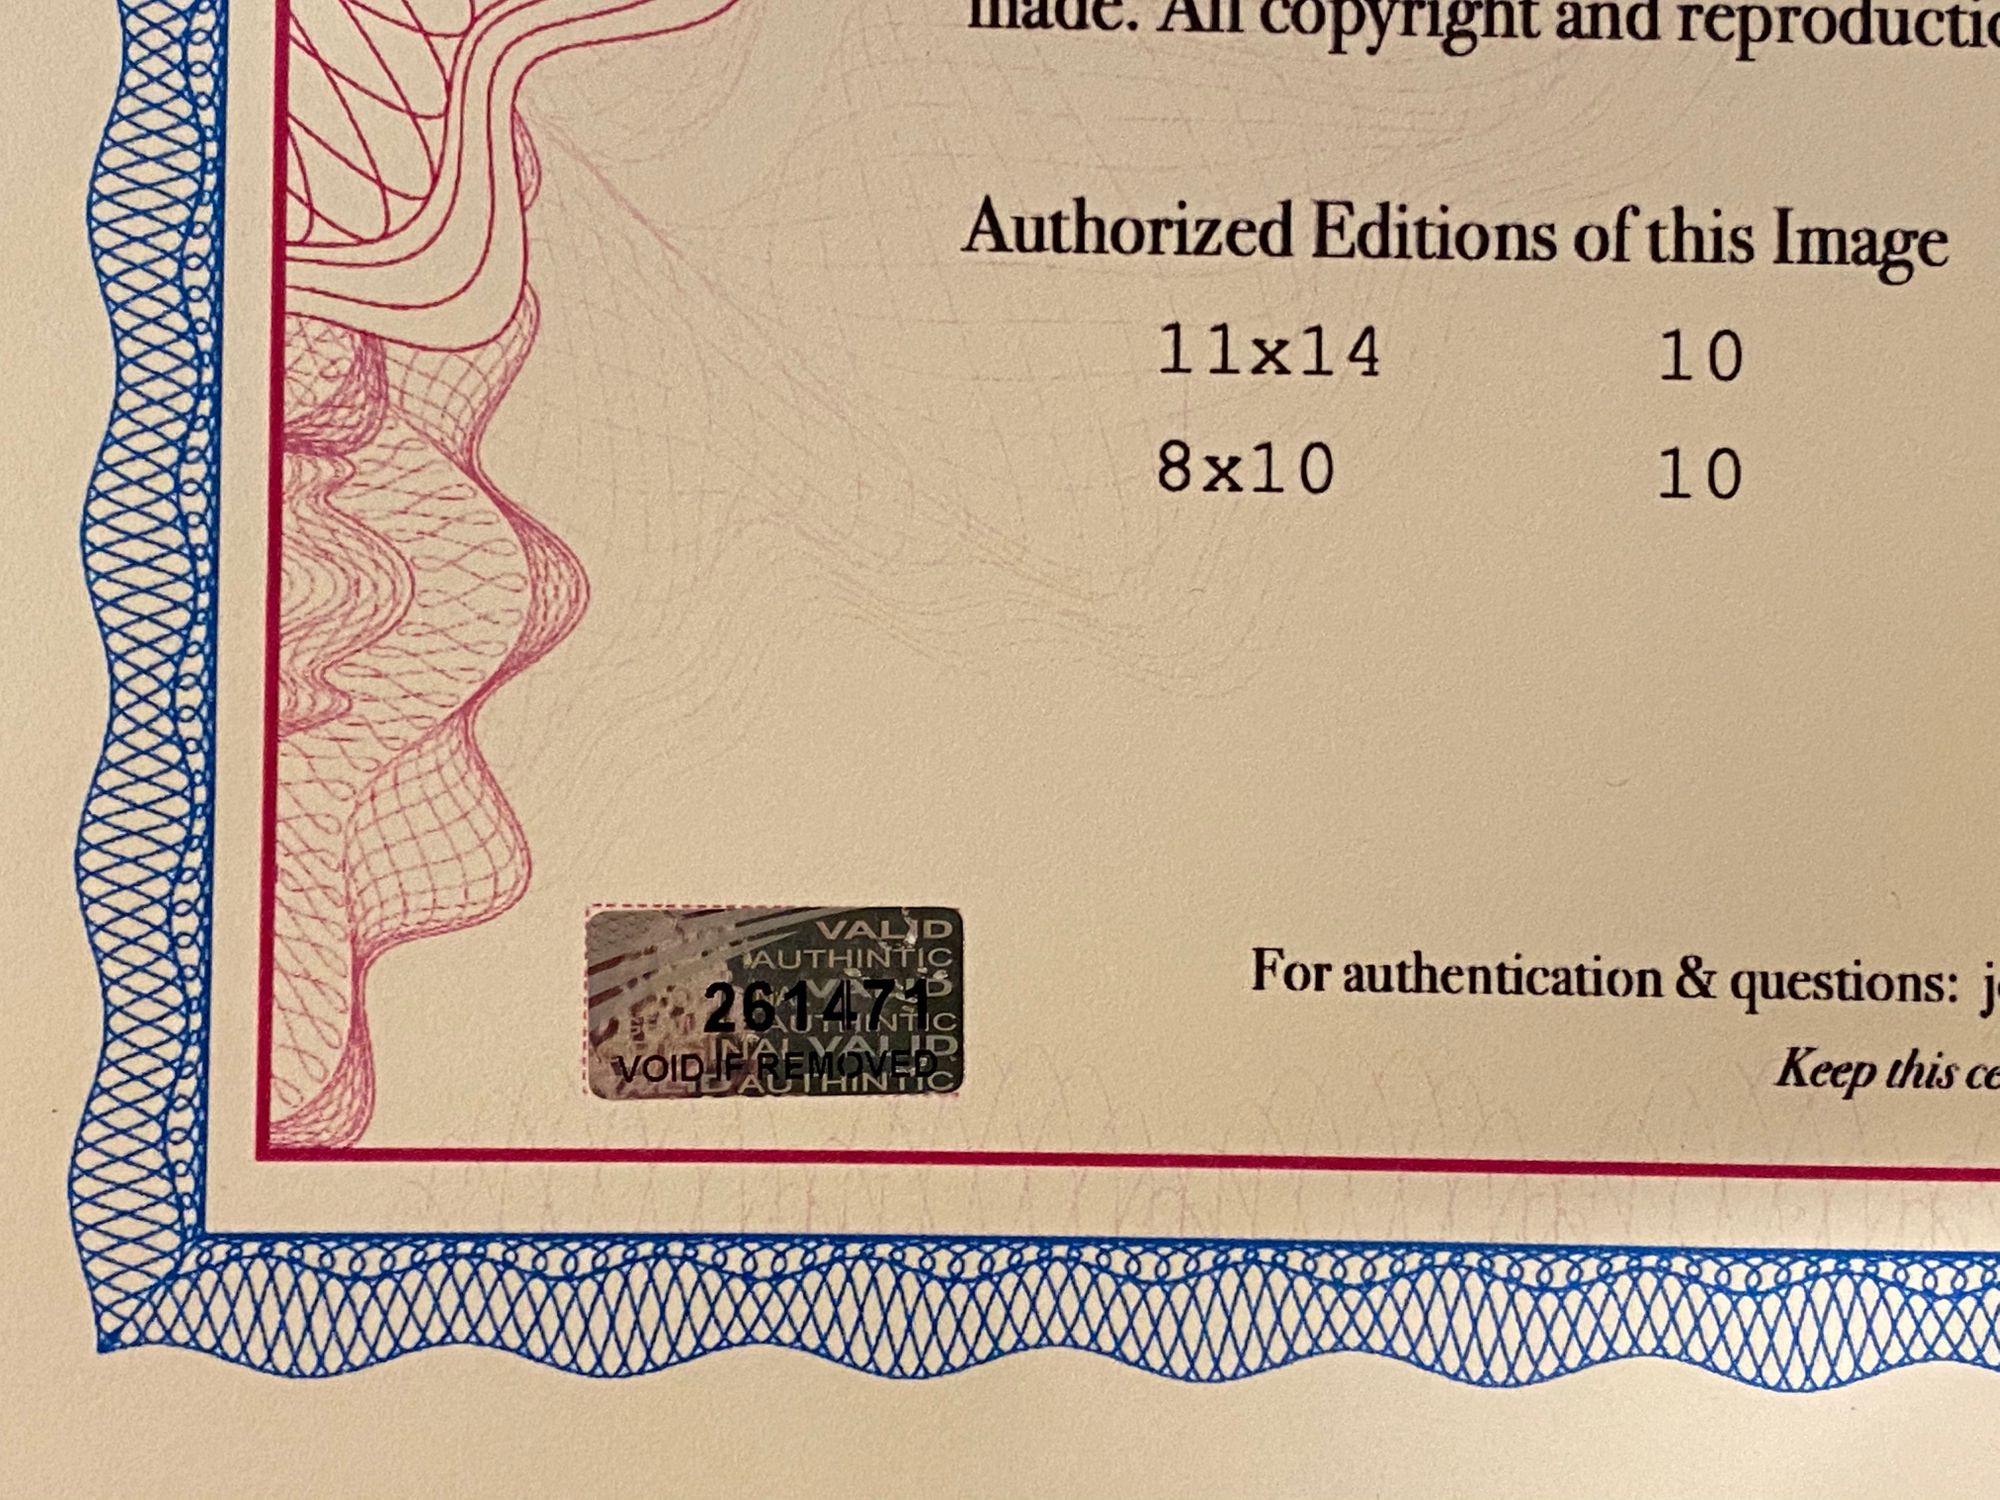 A closeup of the lower left part of my certificate of authenticity with a holographic sticker affixed.